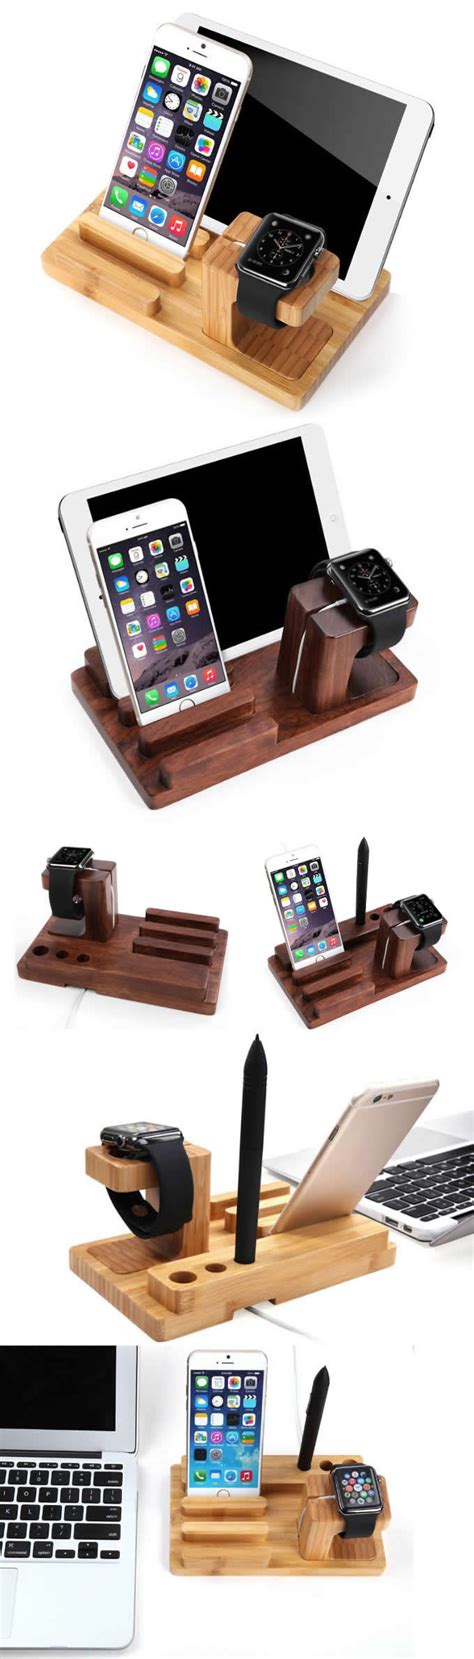 Showing the build process of a mega docking / charging station for all my apple products, gopro, and camera accessories. Bamboo Wooden Apple Watch Charging Station Dock Holder ...